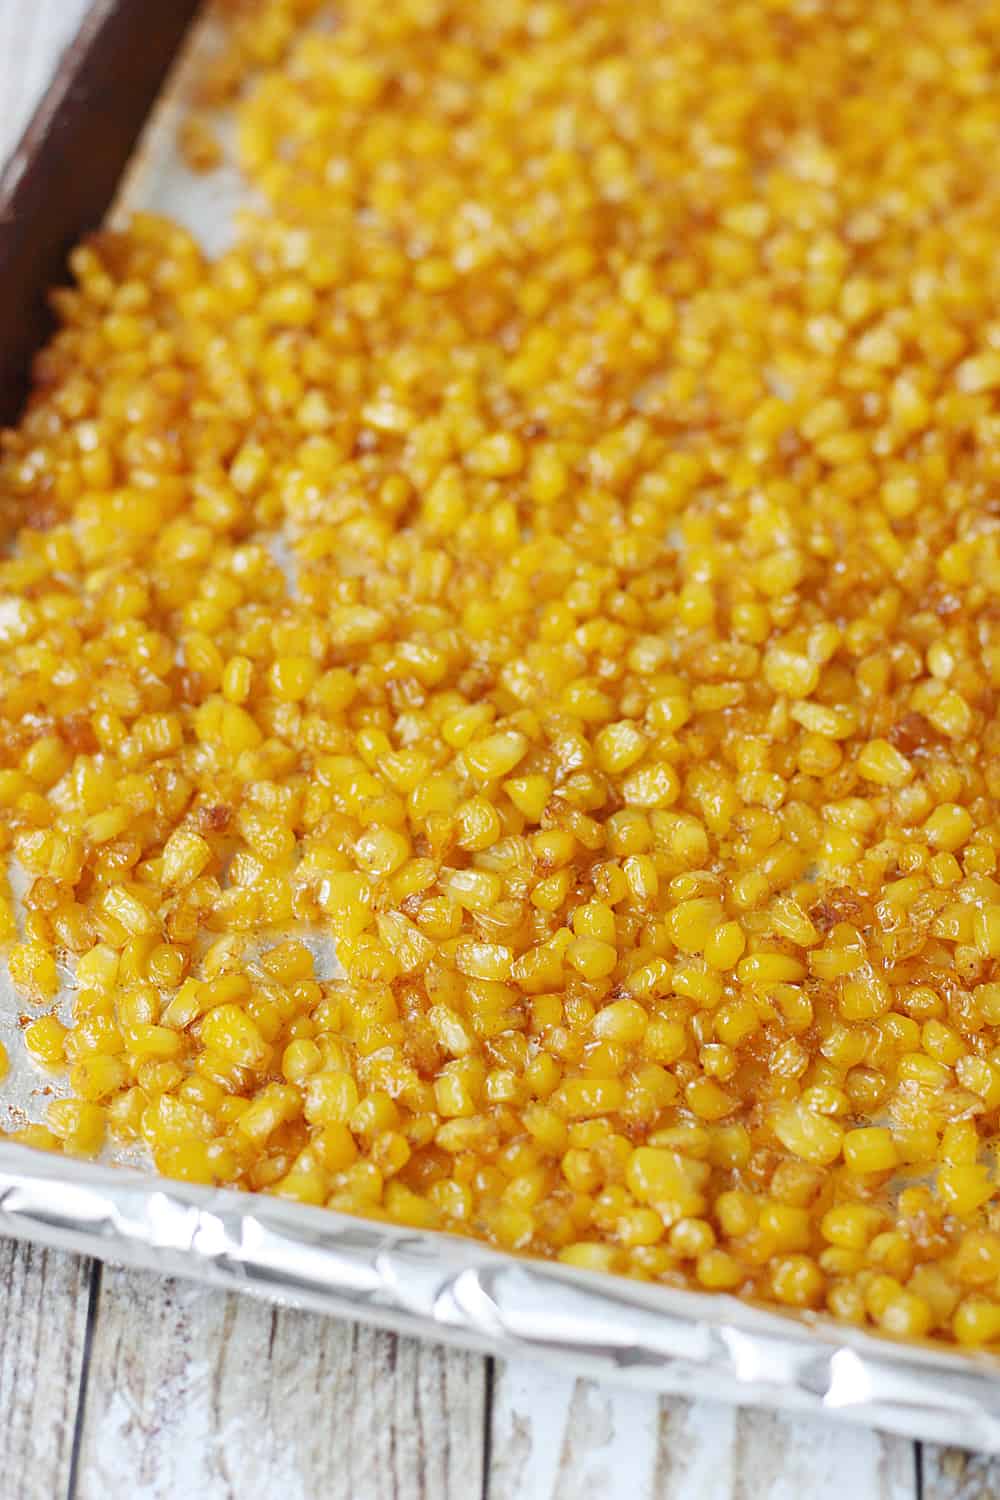 corn on oven baking tray close-up